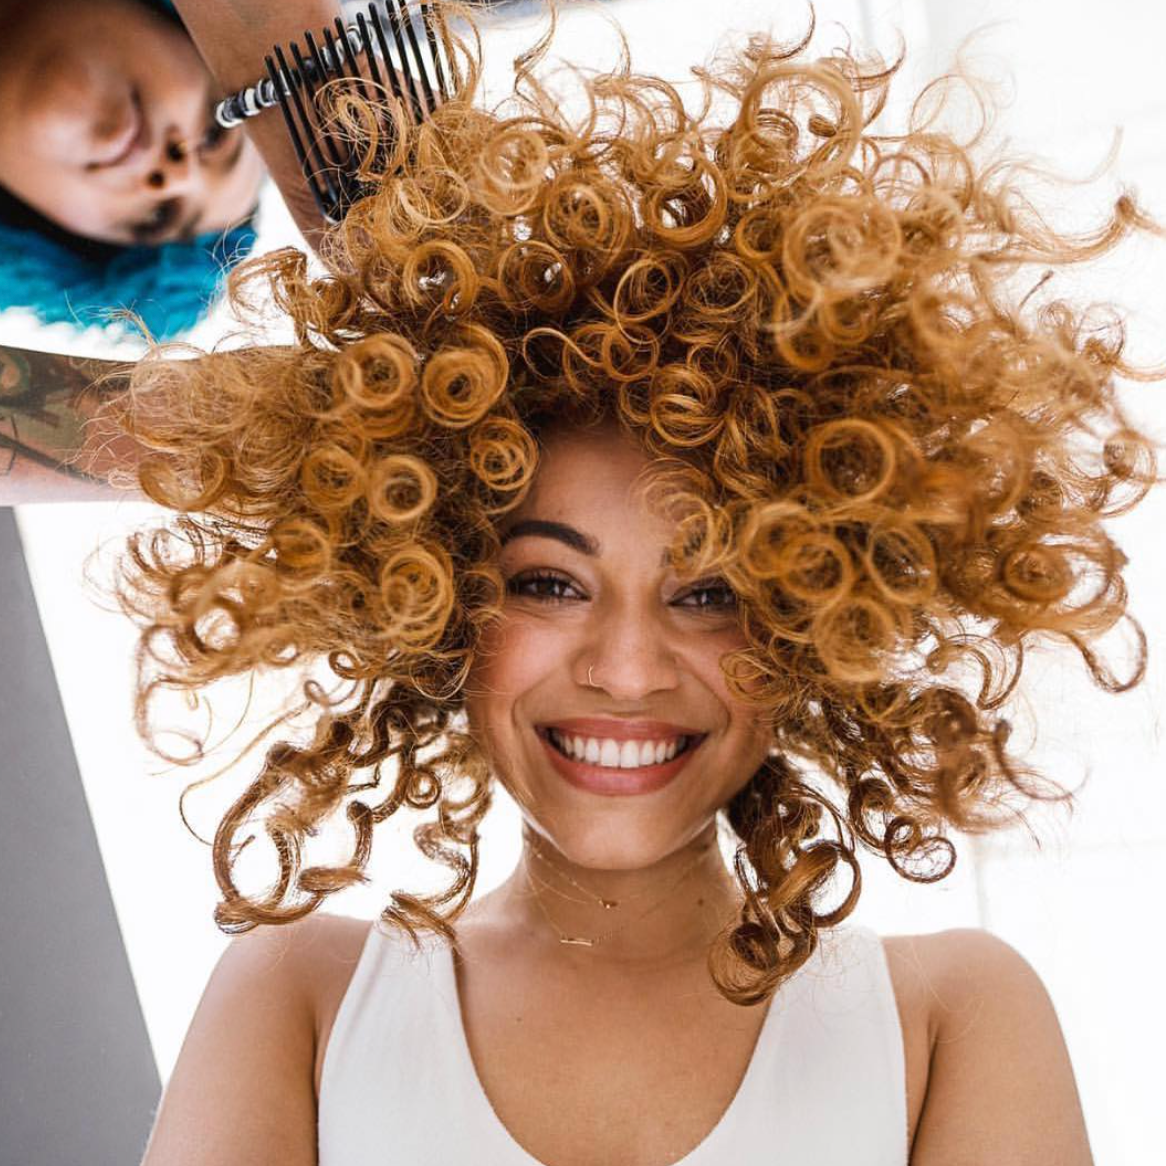 Christin Brown Shares her Game-Changing Tips for Flawless Curls